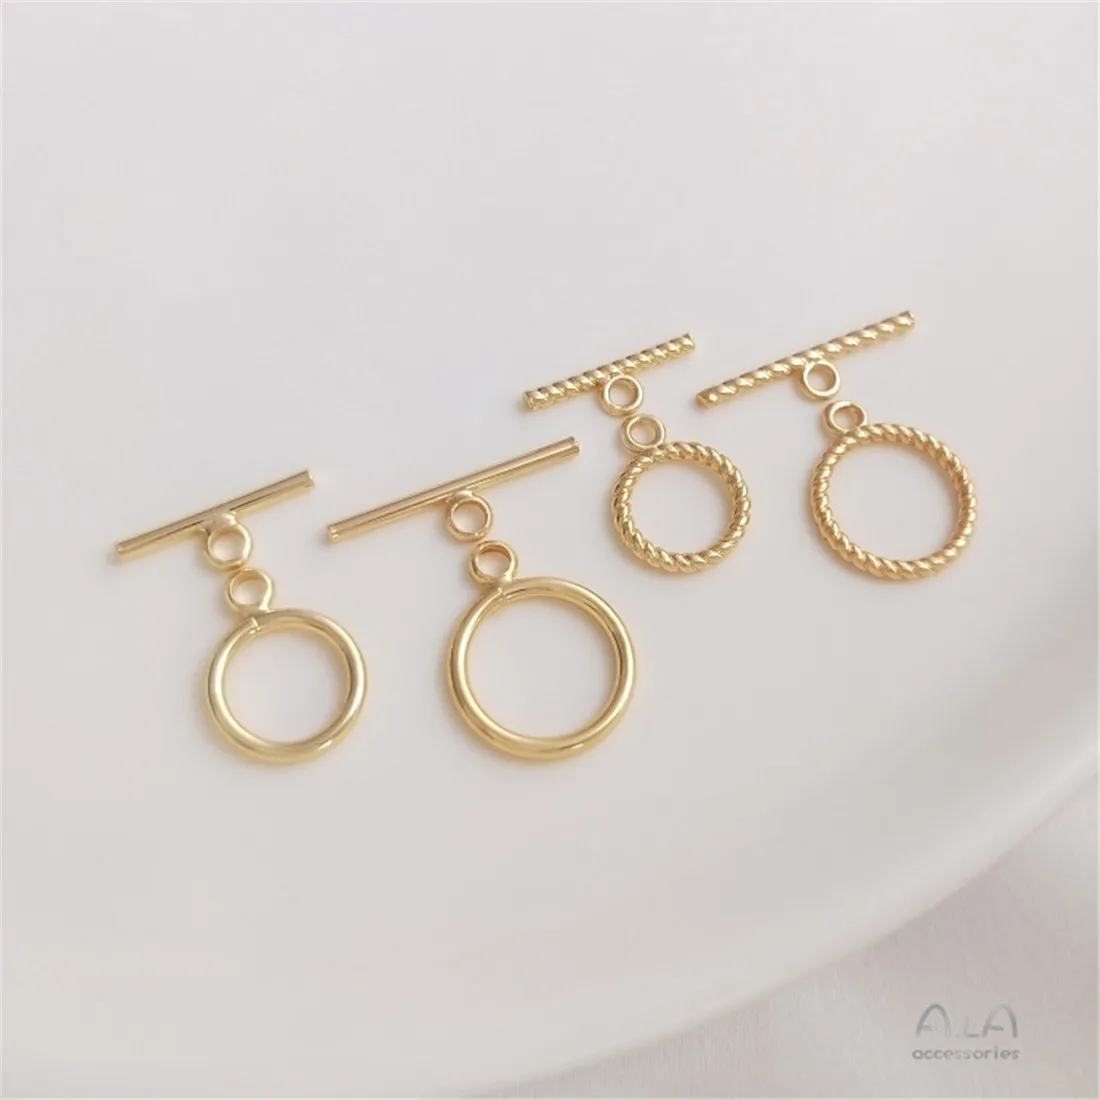 United States 14K Gold-plated Mini OT Buckle Ending Buckle Diy Chain Bracelet Necklace Jewelry Connection Accessories B866